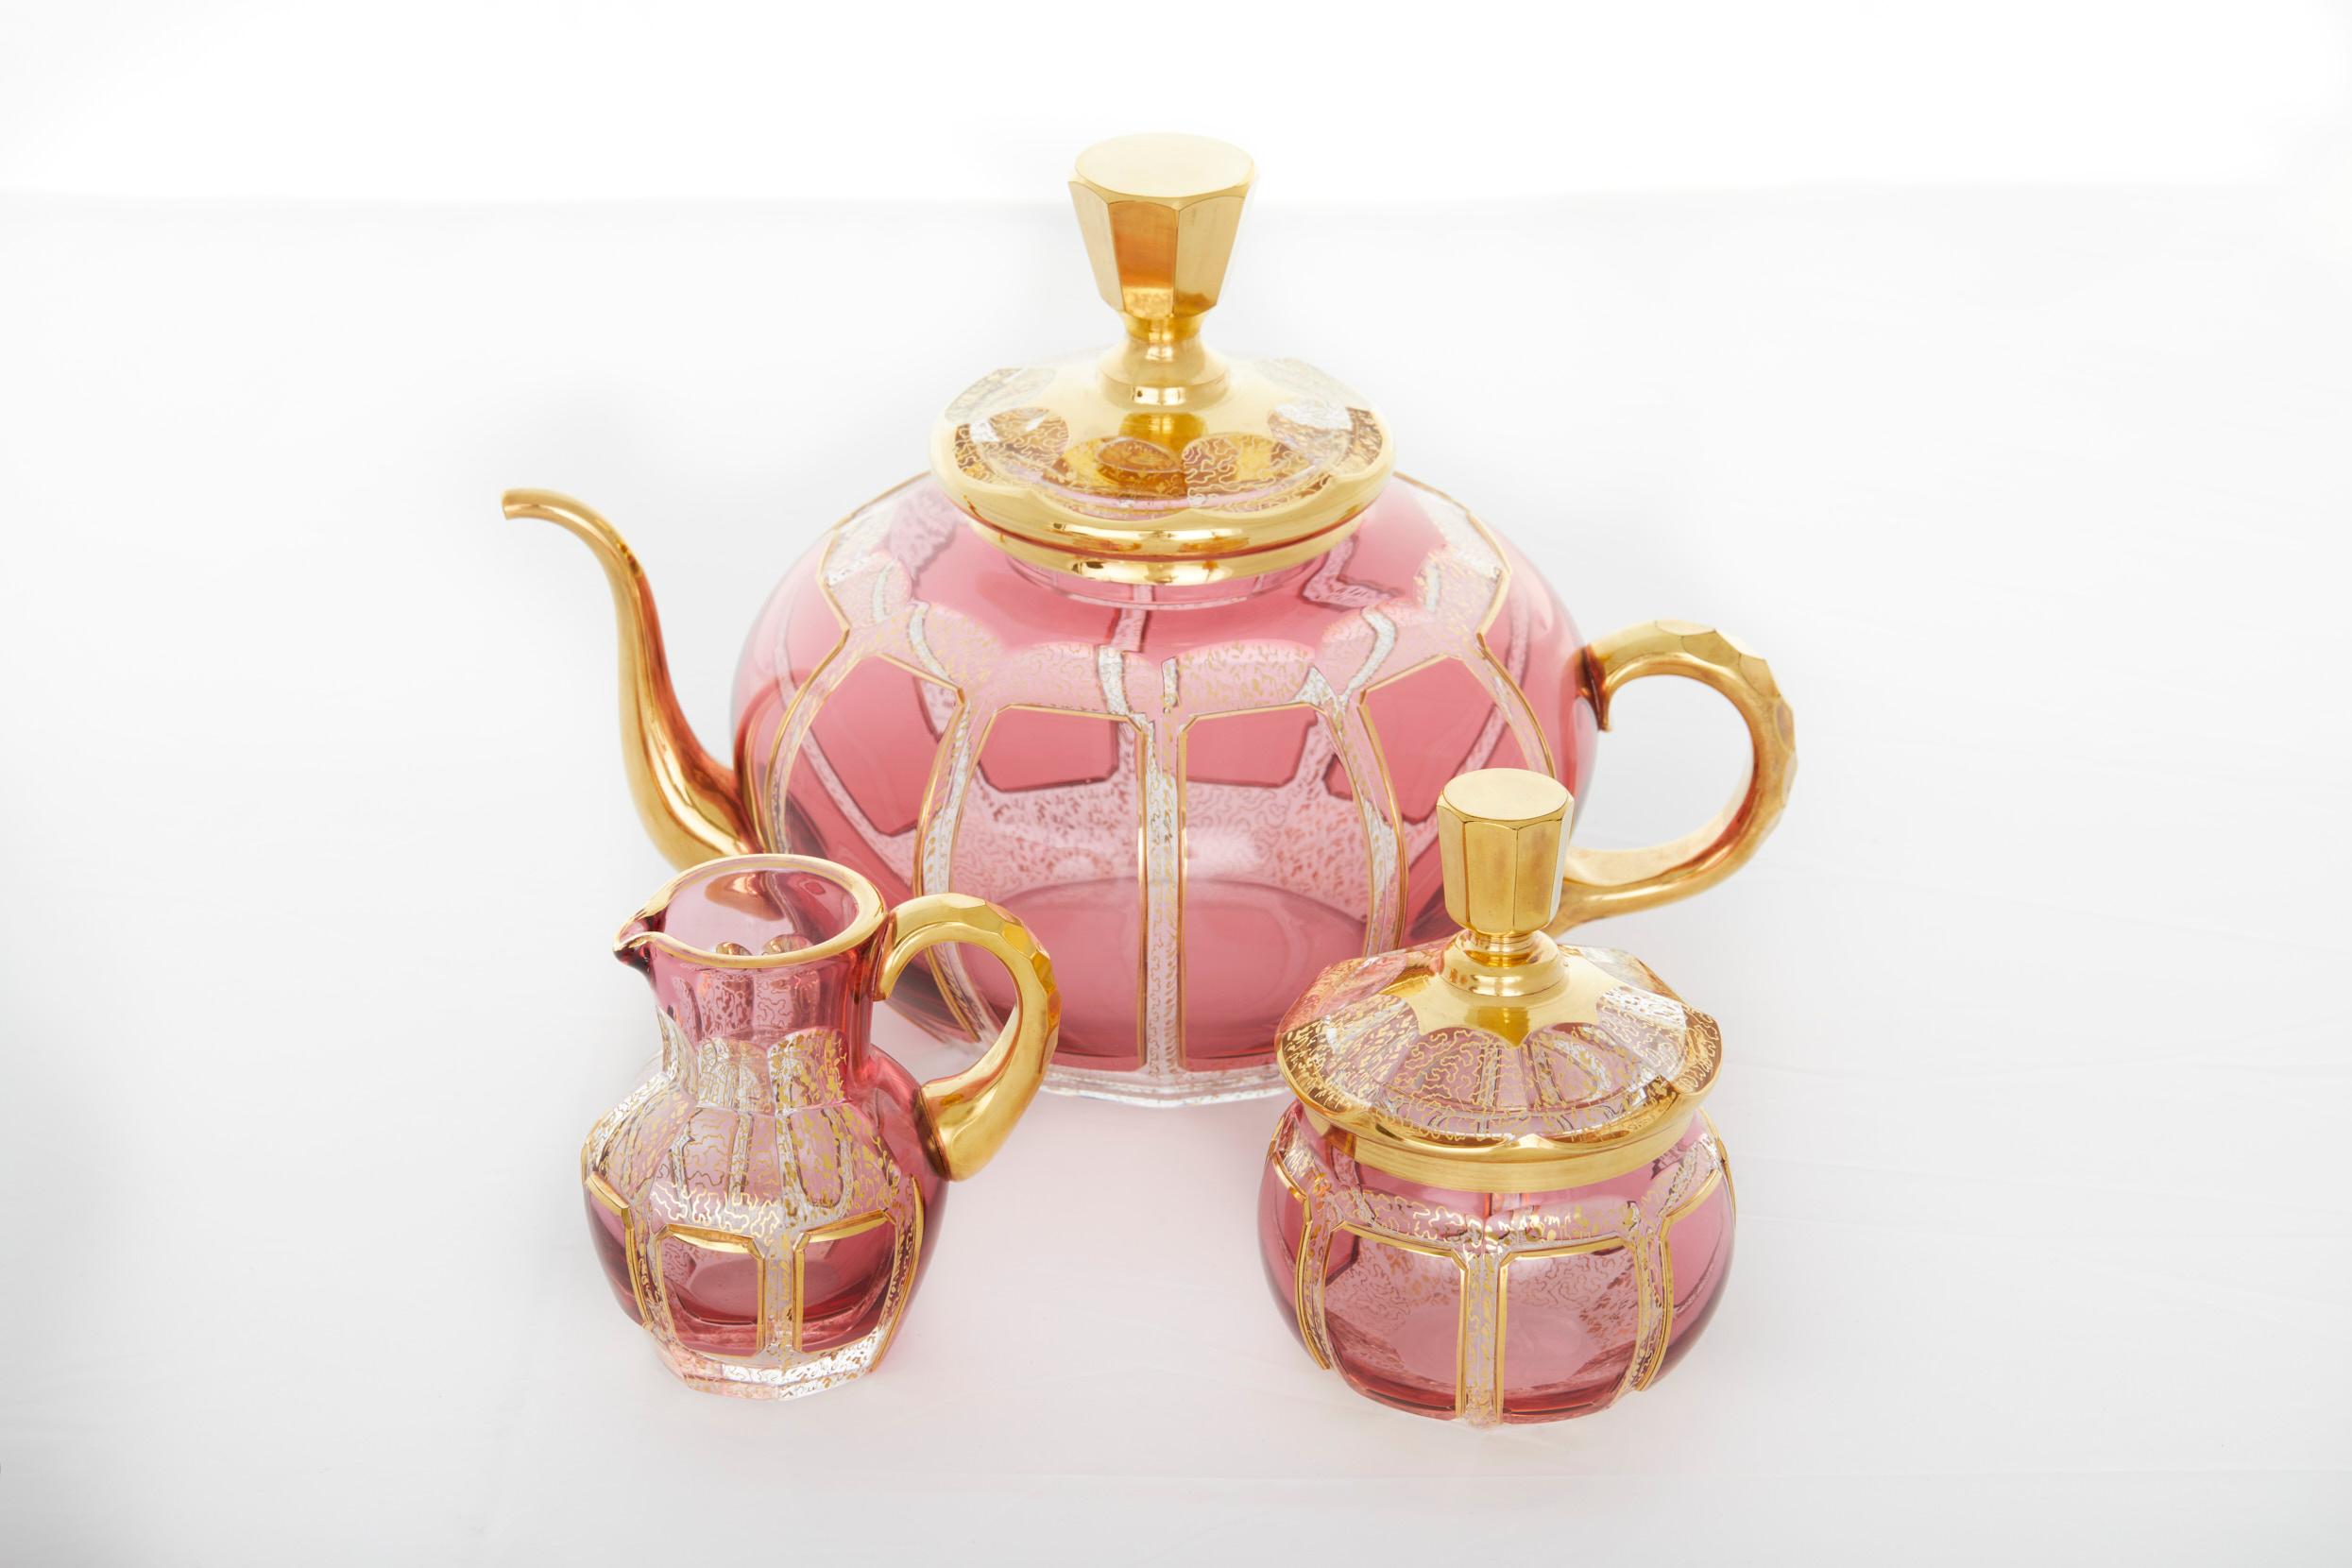 Beautiful and exquisite Moser Enameled Pink paneled with gilt gold design tableware serving tea / coffee service for six people. Each piece is in great condition. Minor shelve wear underneath. No flaws observed, the decoration is bright & intact.